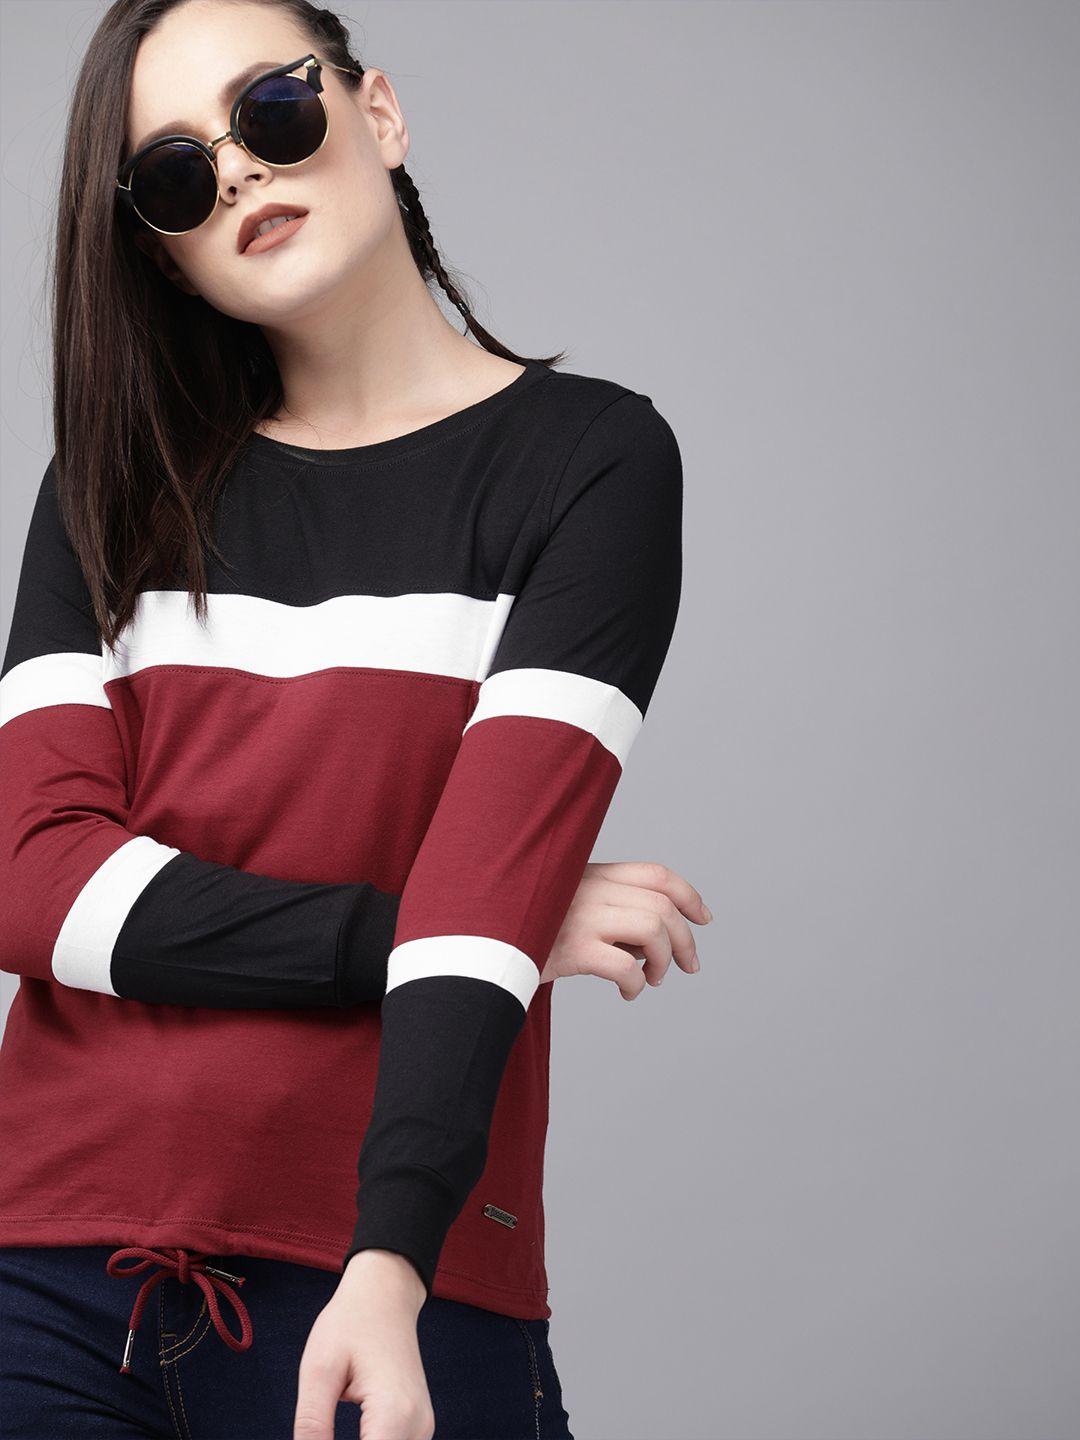 the roadster lifestyle co women red & black colourblocked round neck t-shirt